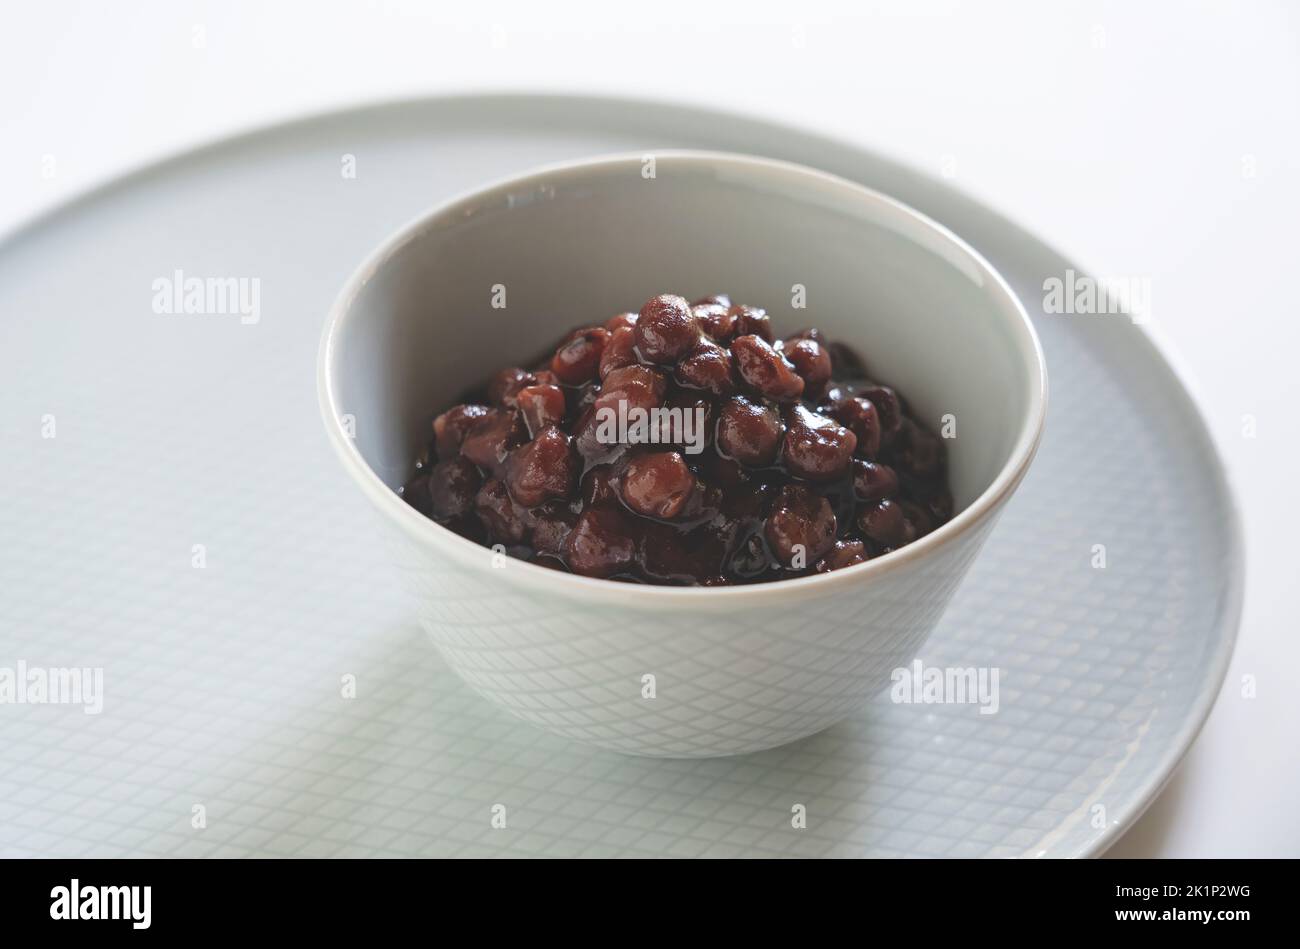 Boiled azuki beans in a small bowl placed against a white background. Stock Photo